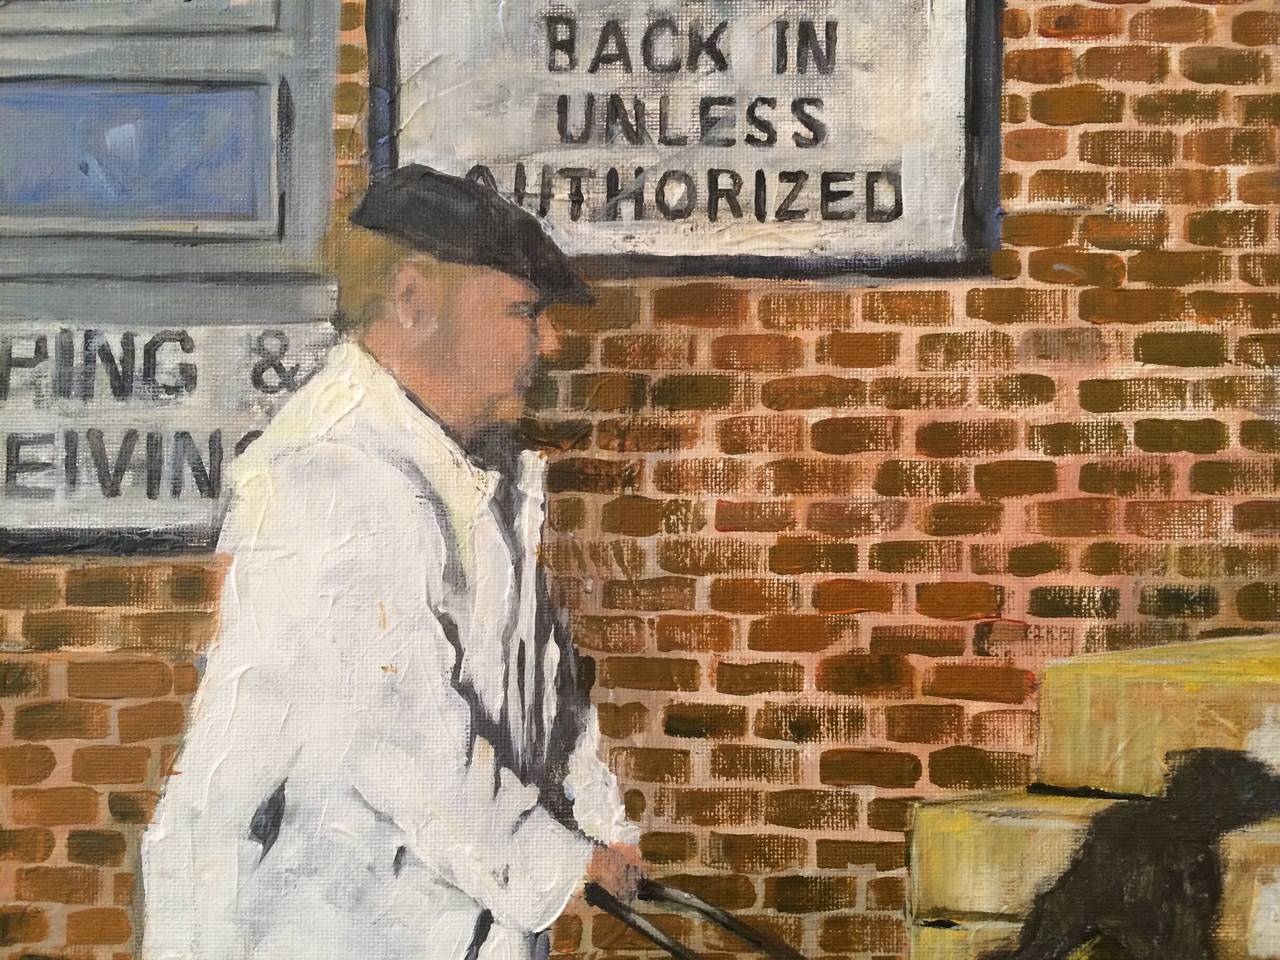 Acrylic on canvas sheet. Wooden frame. Debra Henrichs paints scenes from Fulton Market, Chicago's meatpacking district.